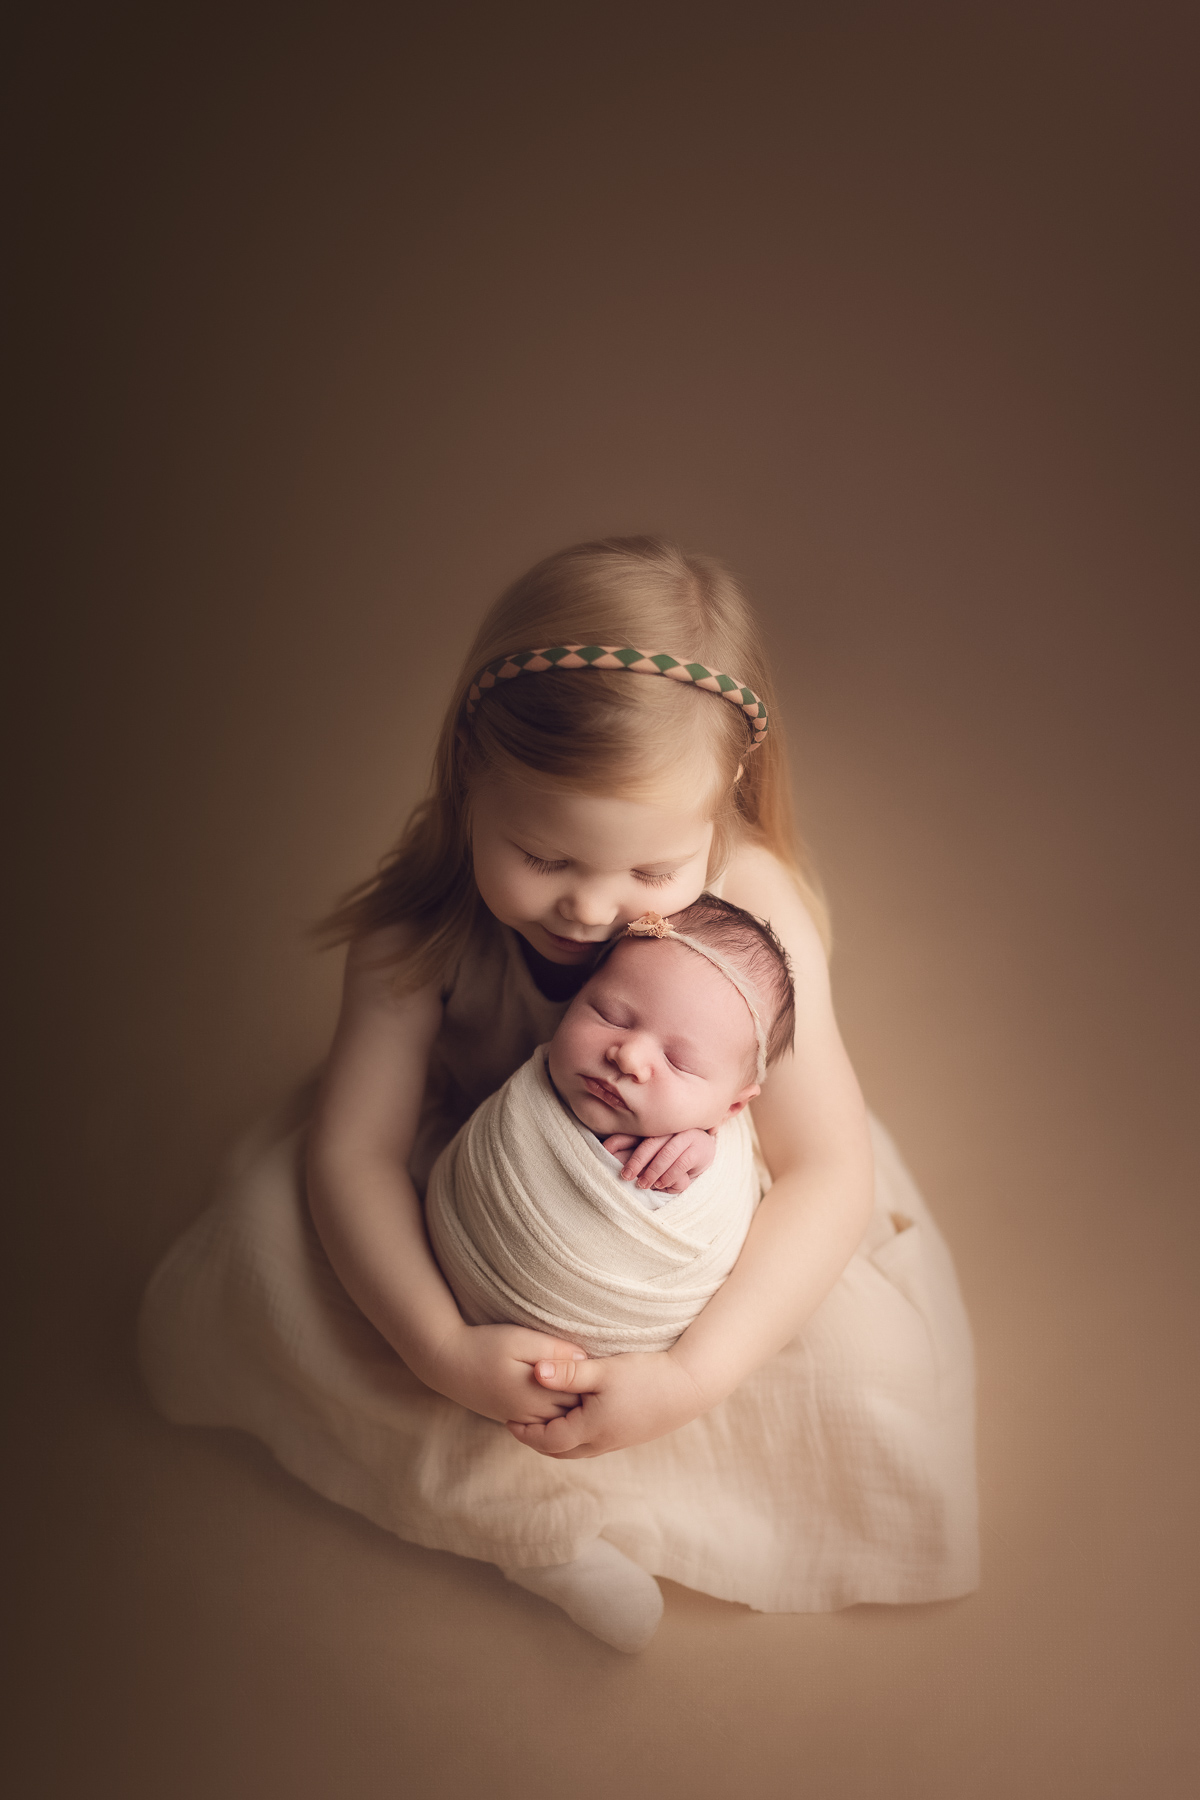 sibling and newborn photography in mocha color background. best newborn photographer